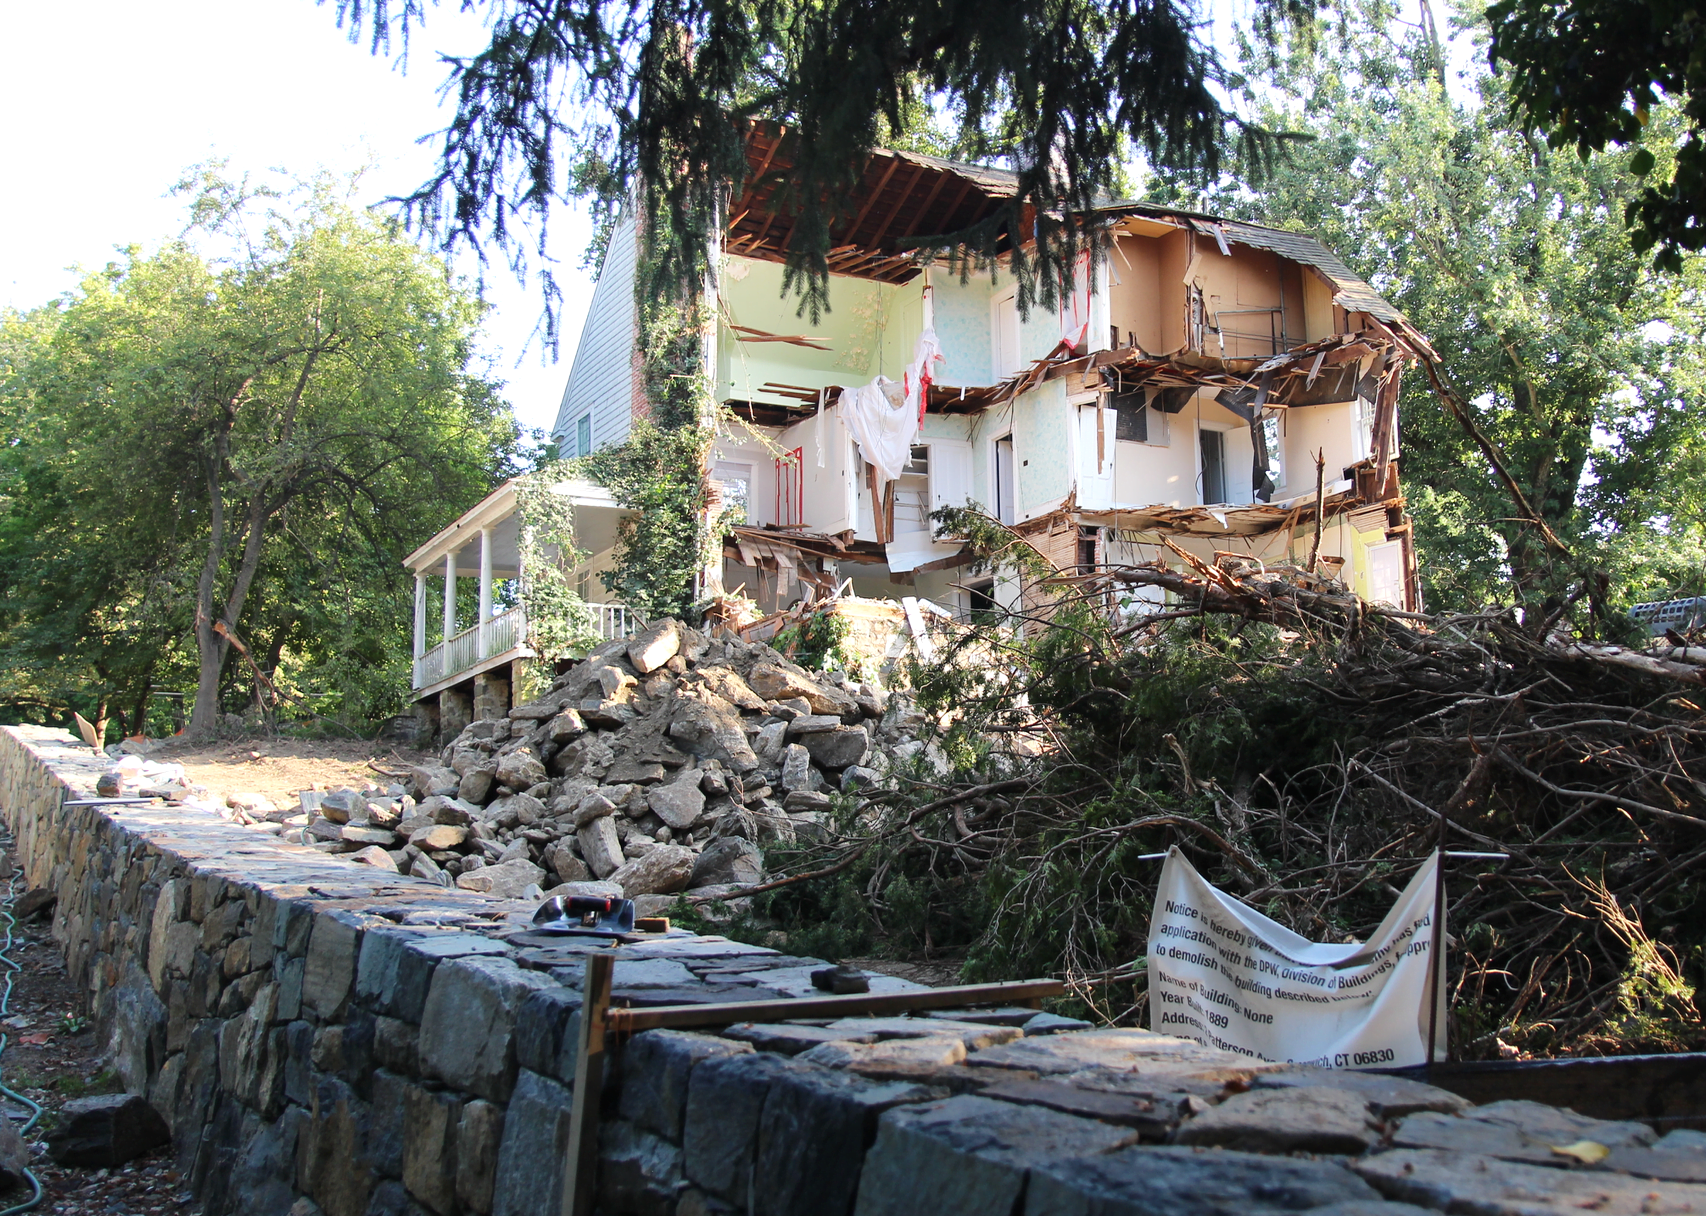 Demolition of the "ghost house" at 2 Patterson property, owned by Greenwich Academy. Aug 20, 2019. Photo: Leslie Yager